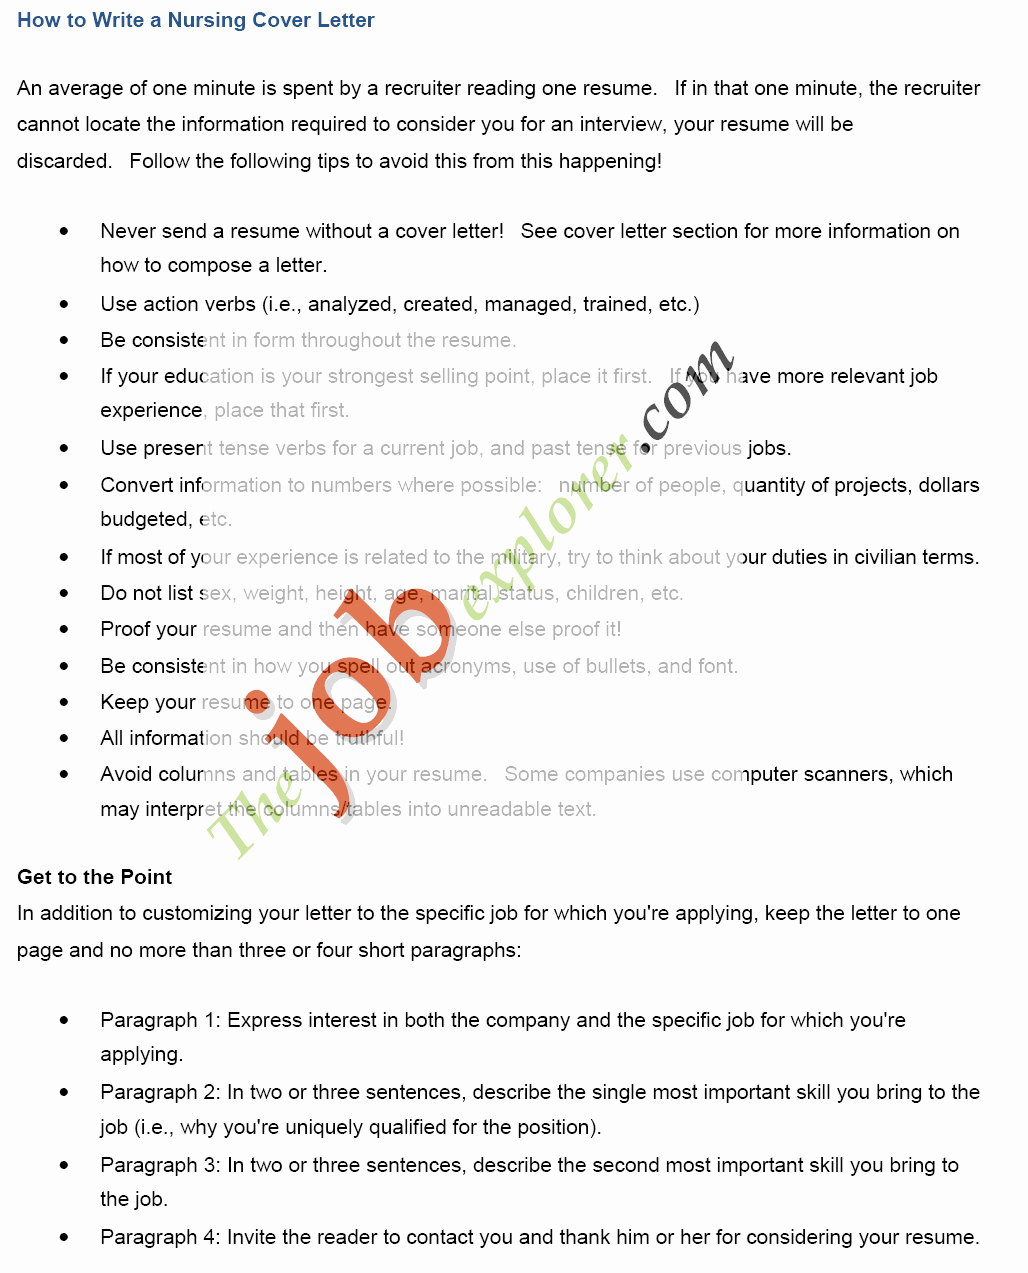 Elements Of A Cover Letter New Cover Letter Nursing Cover Letter Elements Of An